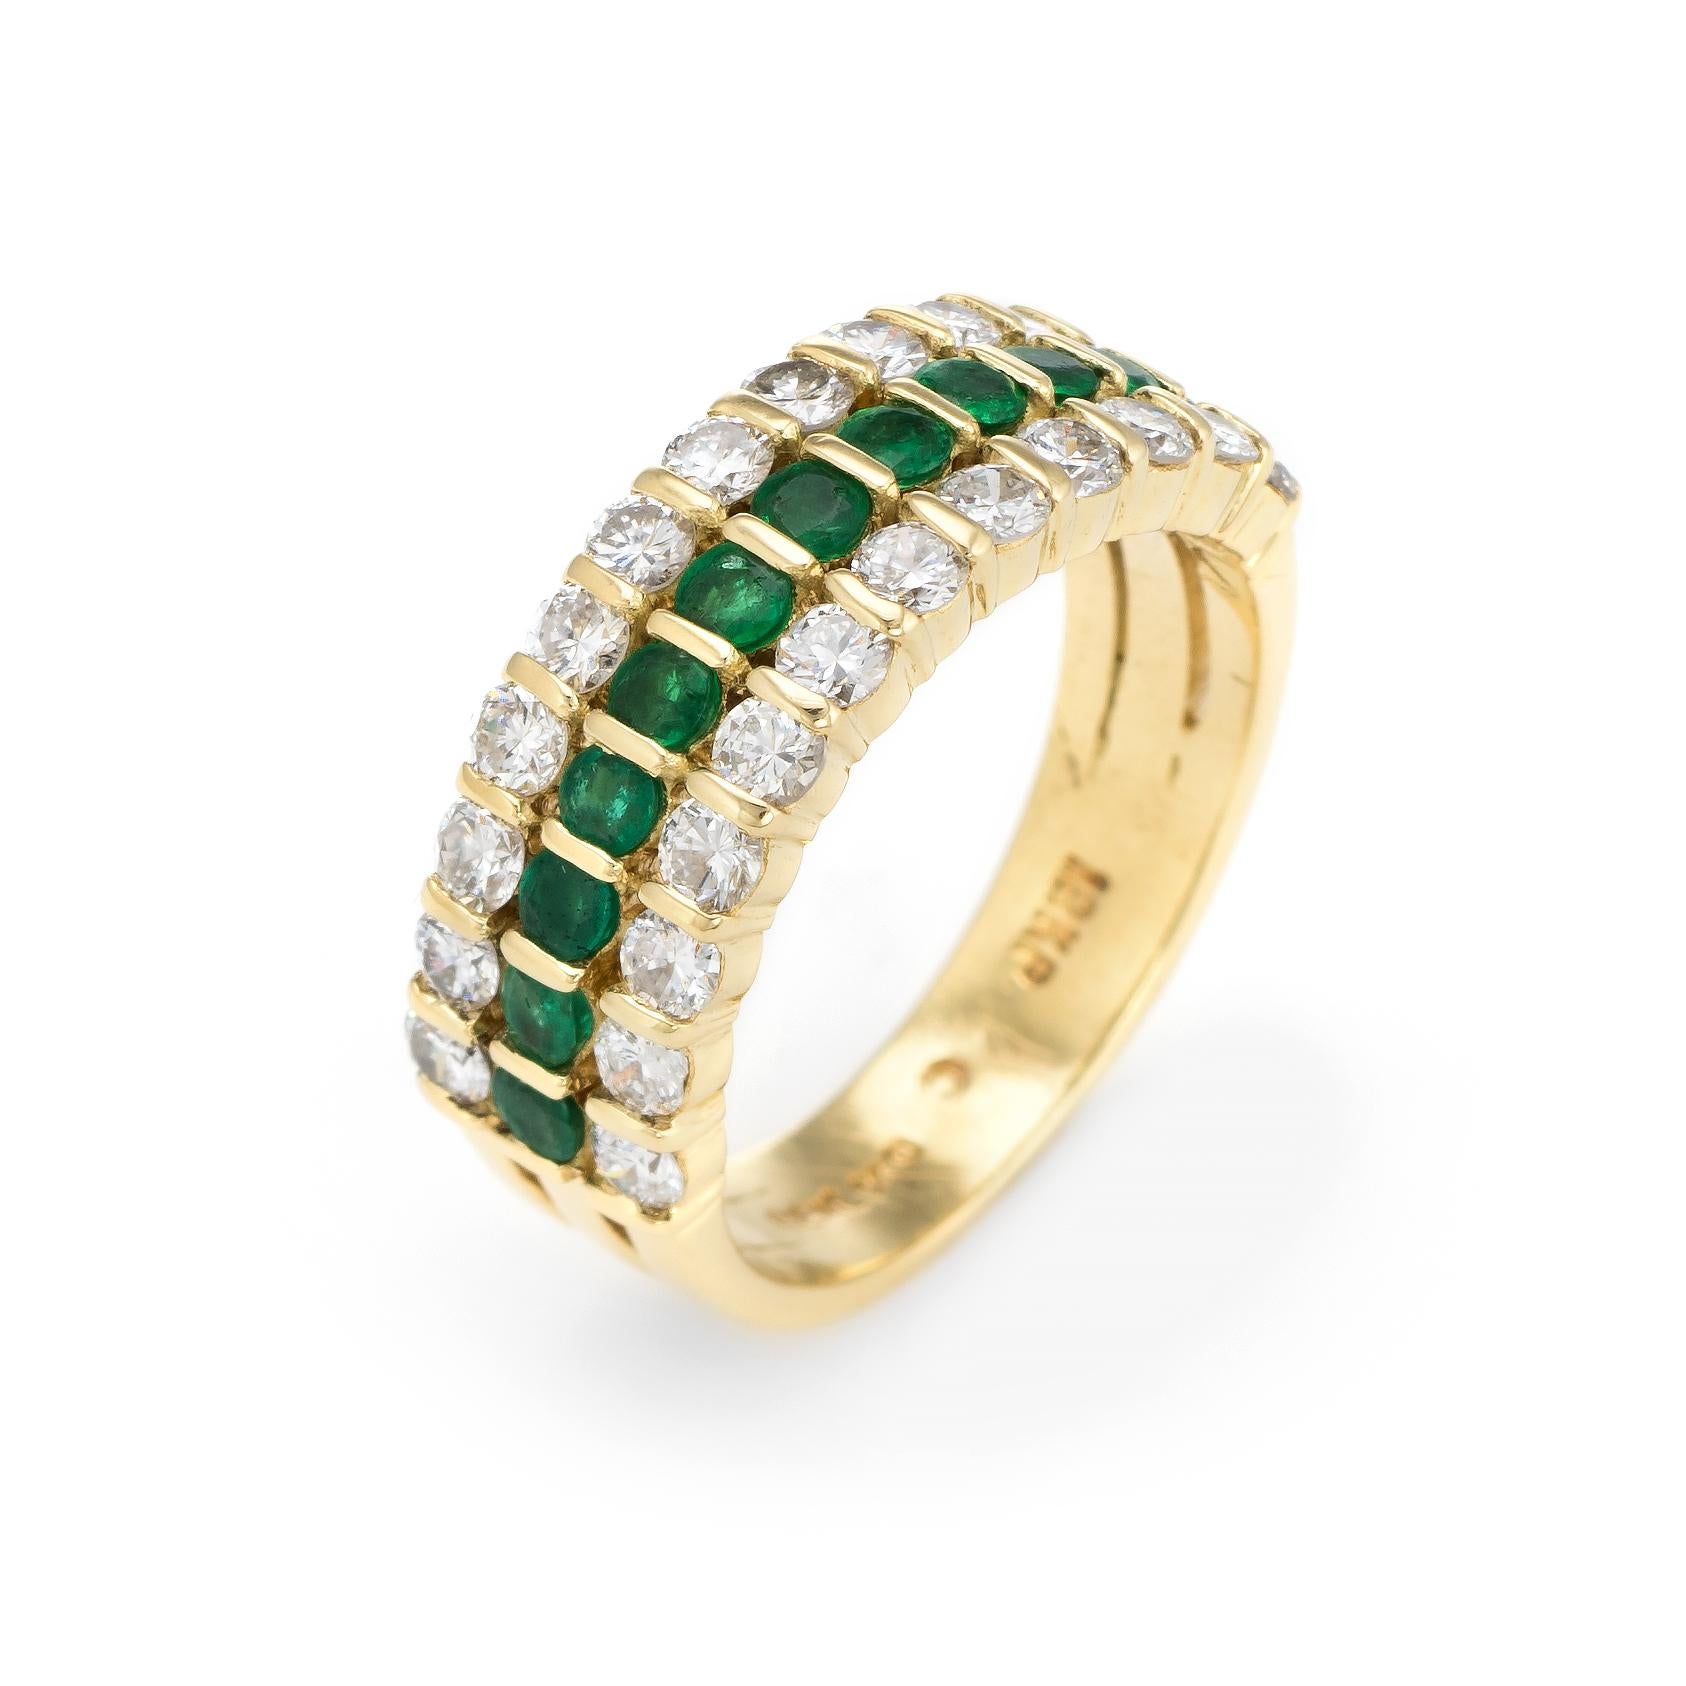 Finely detailed vintage emerald & diamond band, crafted in 18 karat yellow gold. 

24 full cut diamonds are estimated at 0.05 carats each, totaling an estimated 1.20 carats (estimated at H-I color and SI1-2 clarity). The 12 emeralds are each